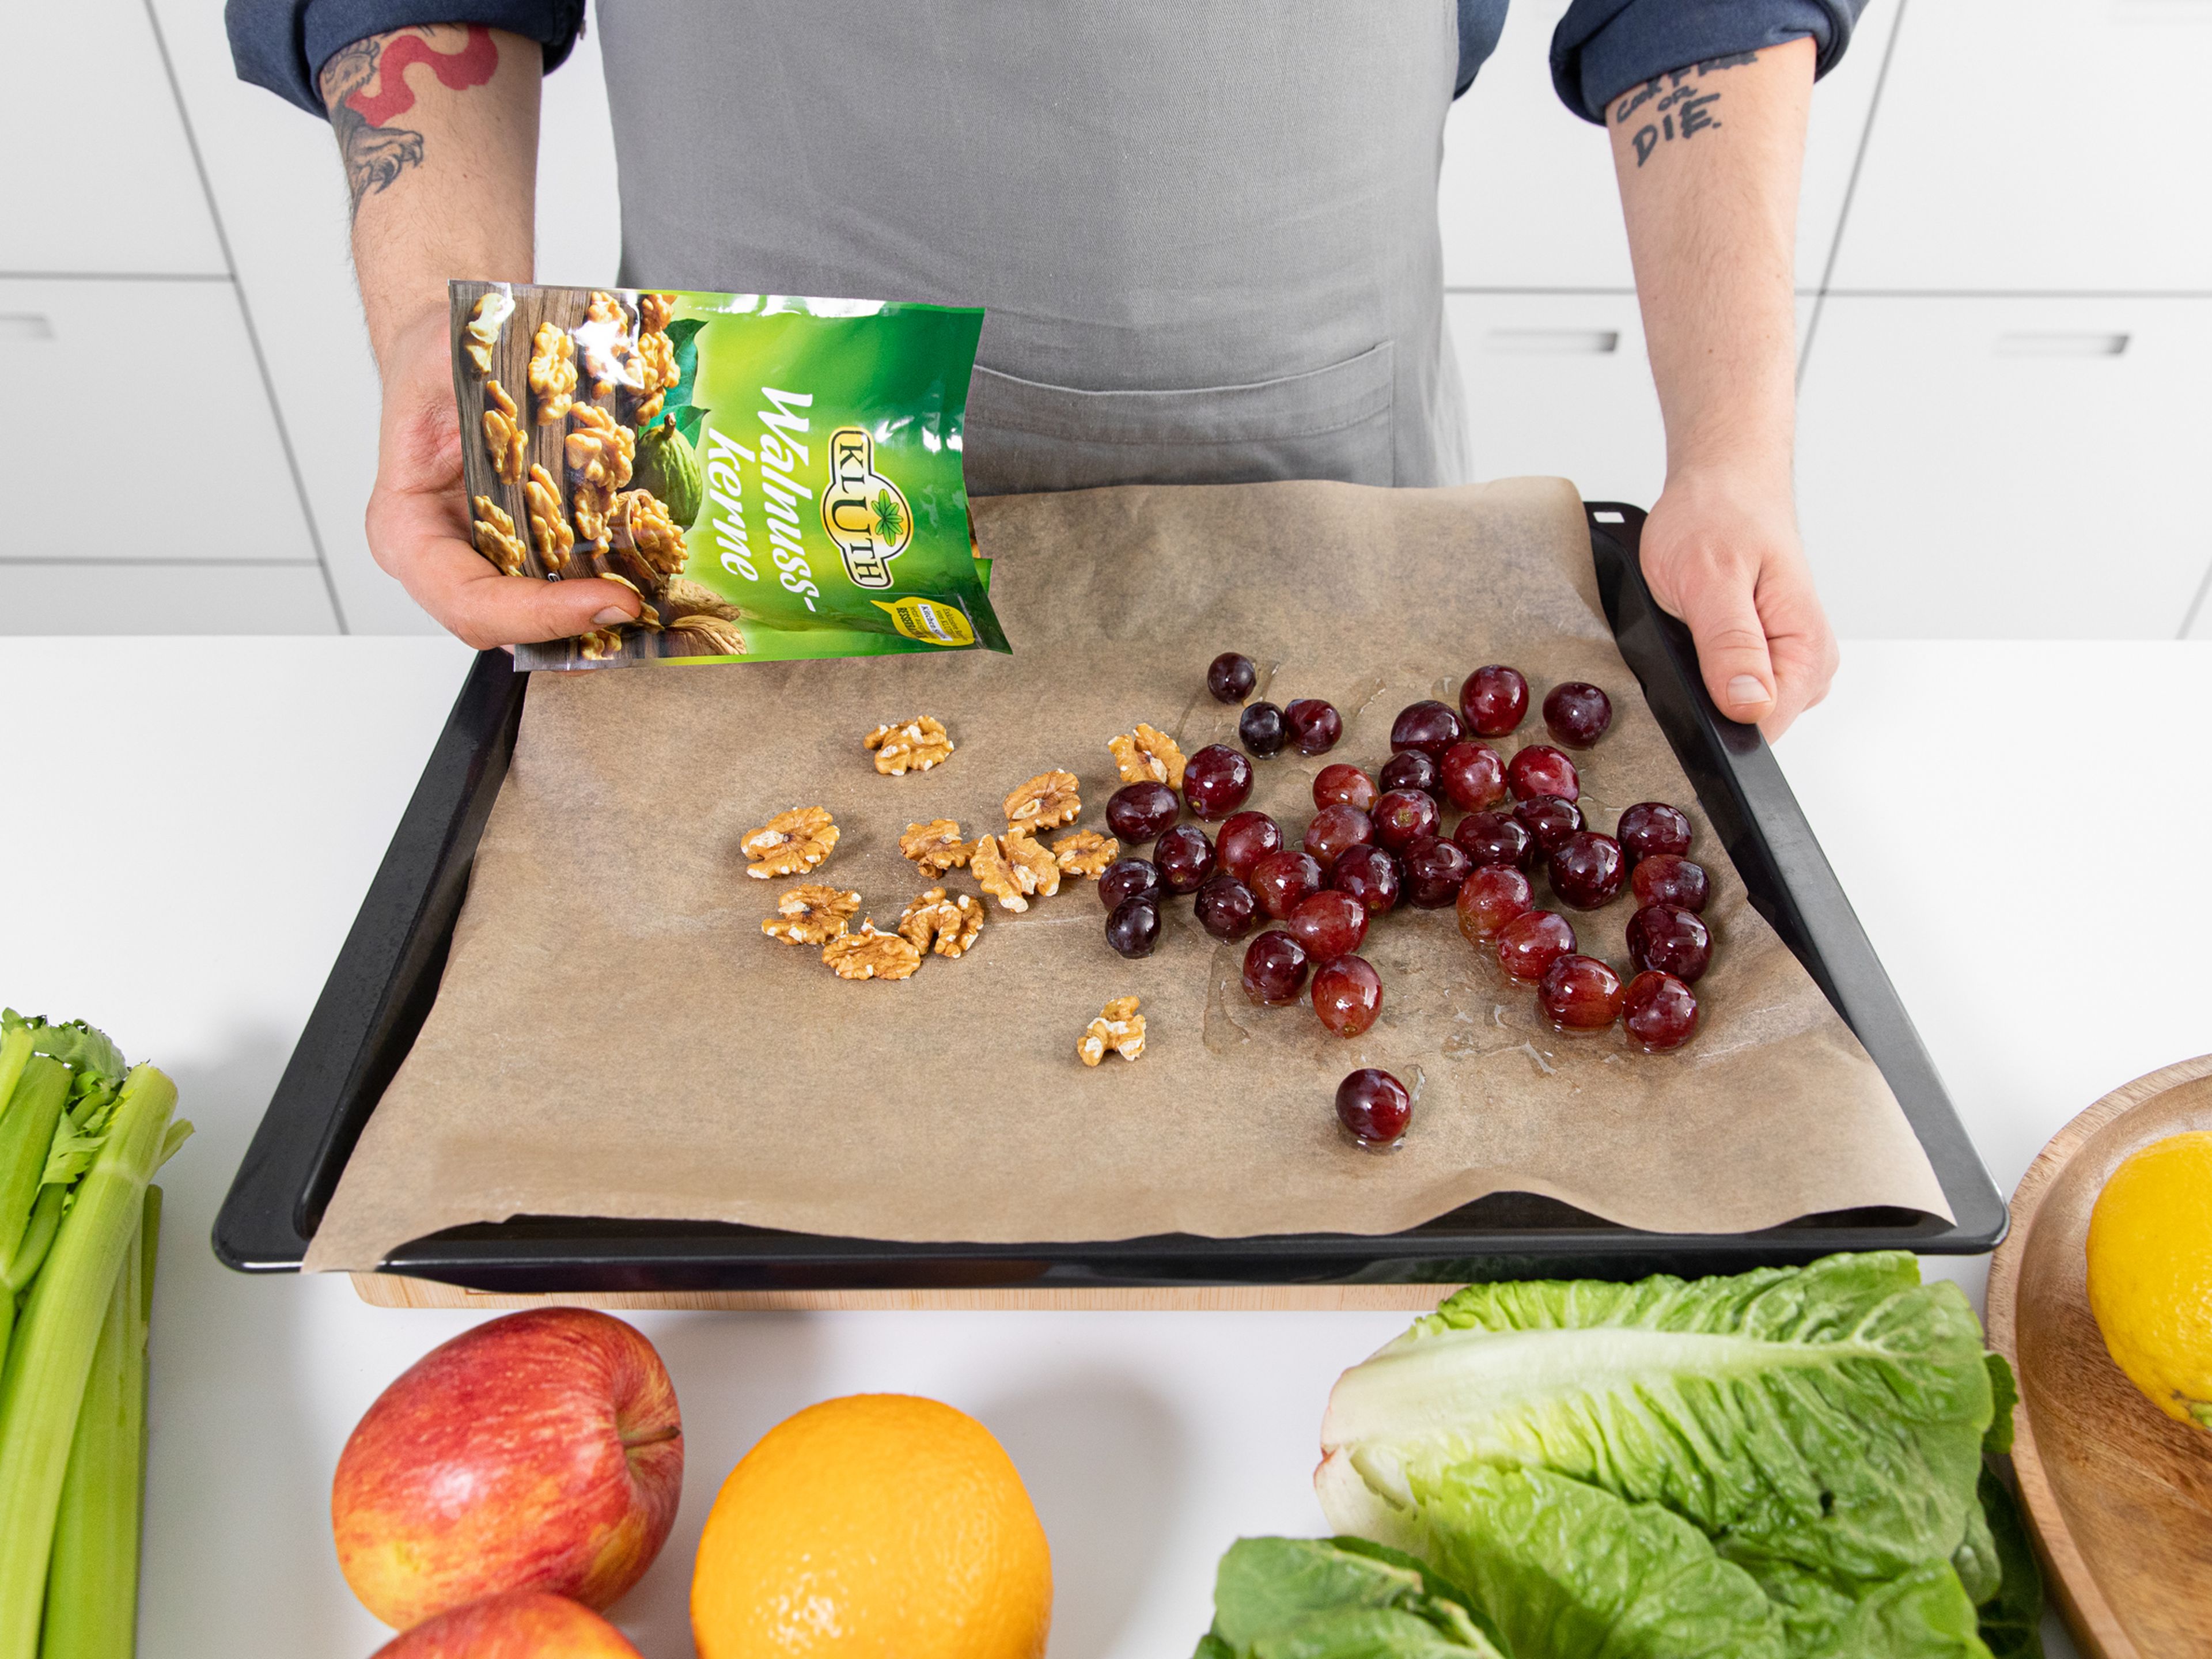 Preheat the oven to 180°C/350°F. Line a baking sheet with parchment paper. Toss grapes, olive oil, salt, and pepper in a bowl, until well combined. Add to half of the baking sheet. Add the walnuts to the other side. Let walnuts roast for 5 - 8 min., or until browned, then remove. Continue baking the grapes until caramelized, approx. 15 min. in total.